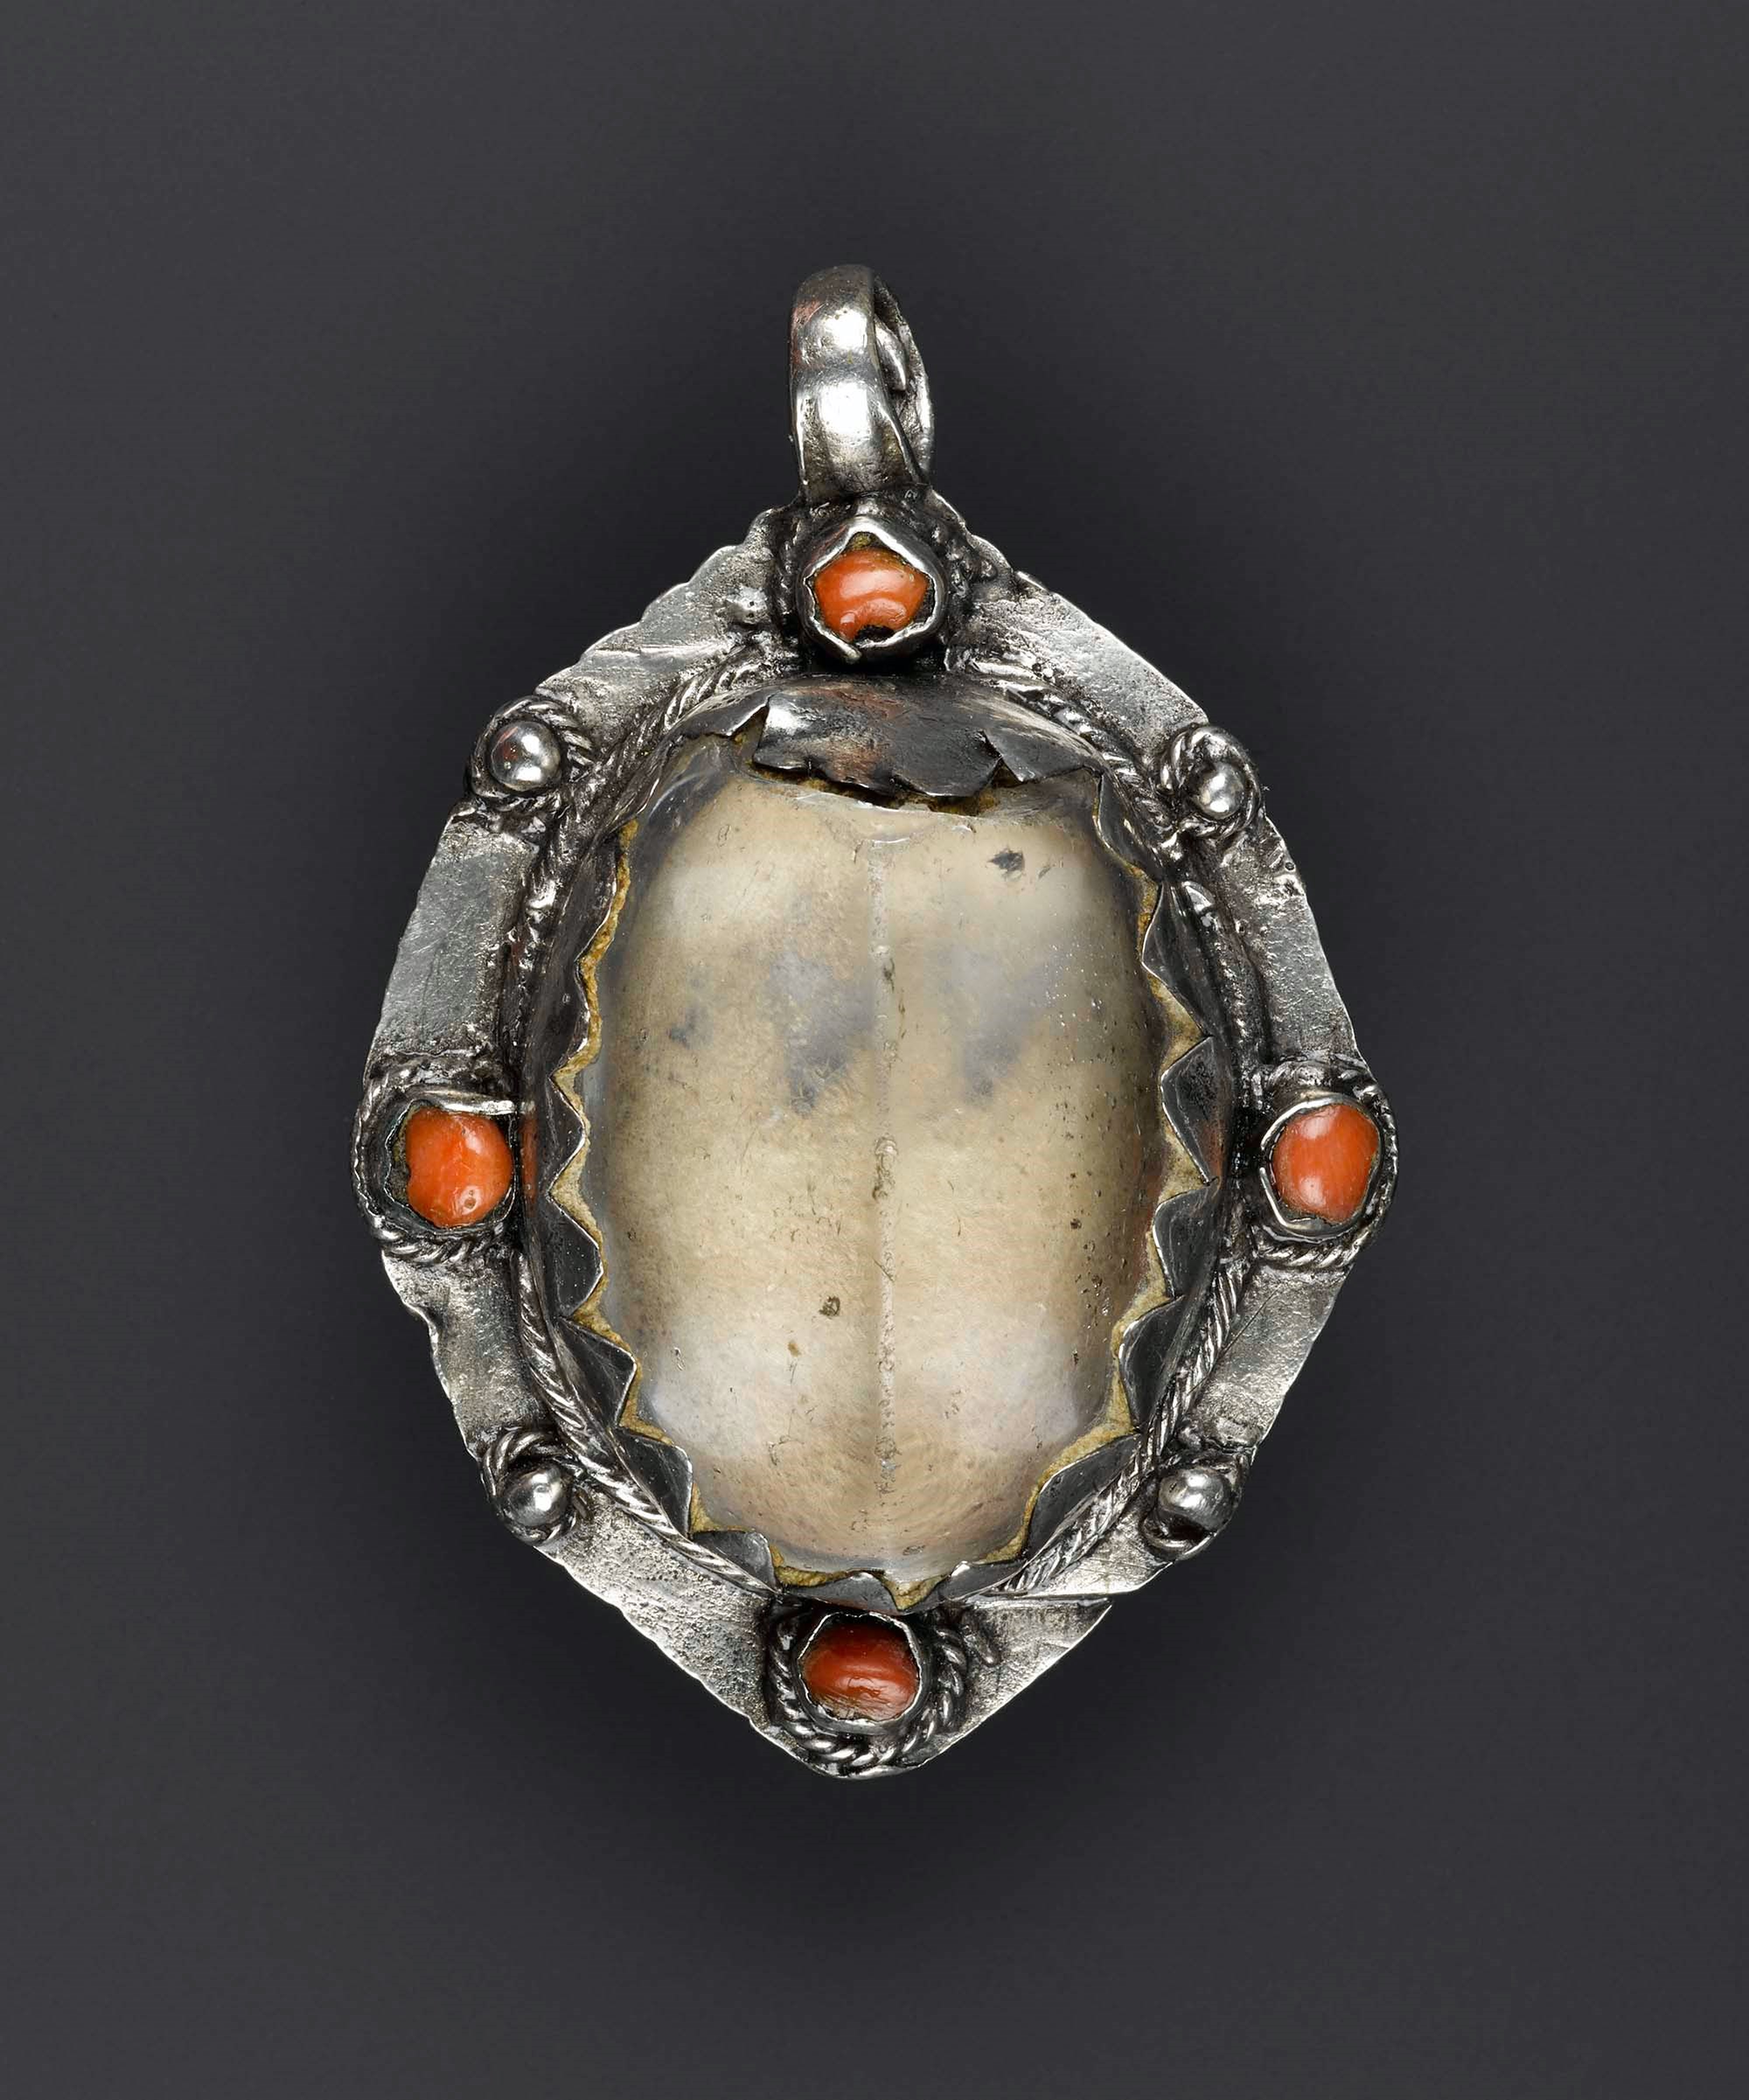 An oval shaped pendant with a crystal centre and jewels on the outer edge.